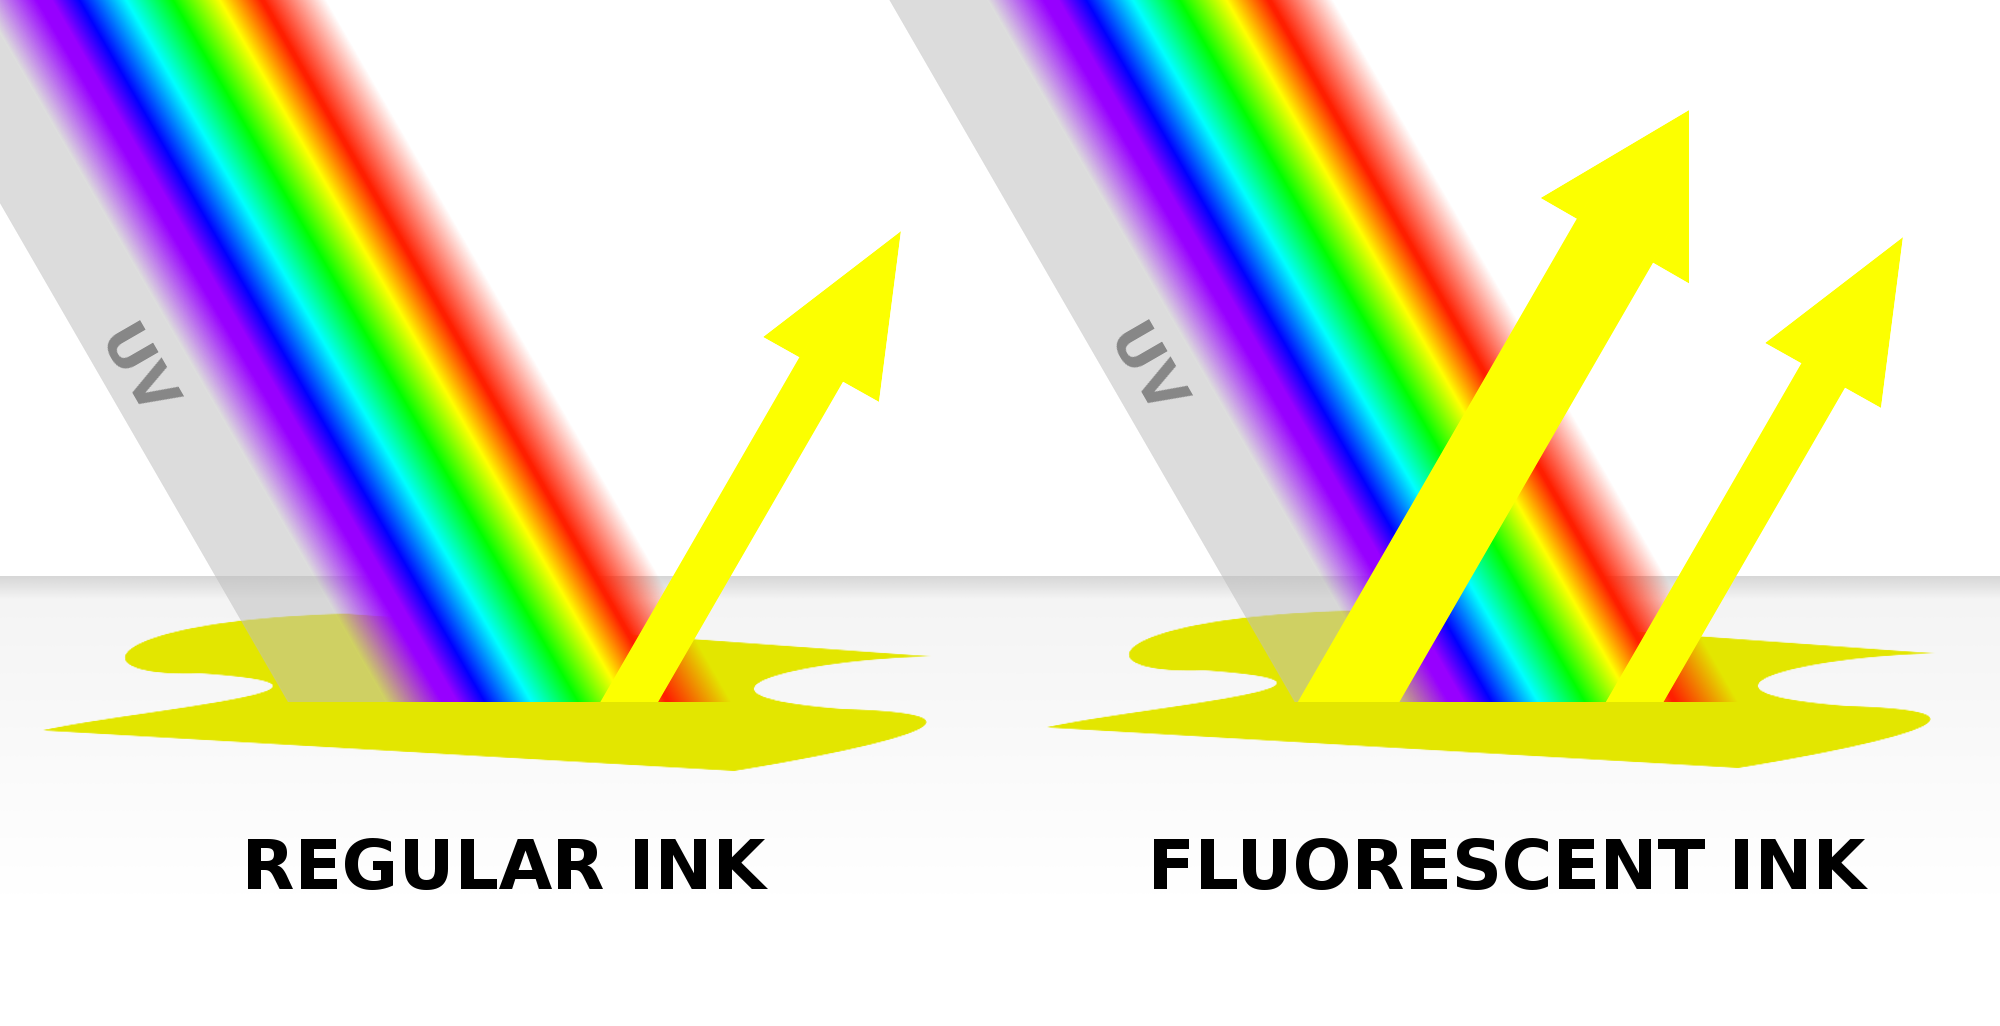 Fluorescent_ink_vs_regular_ink_and_how_it_reflects_certain_wavelengths.png